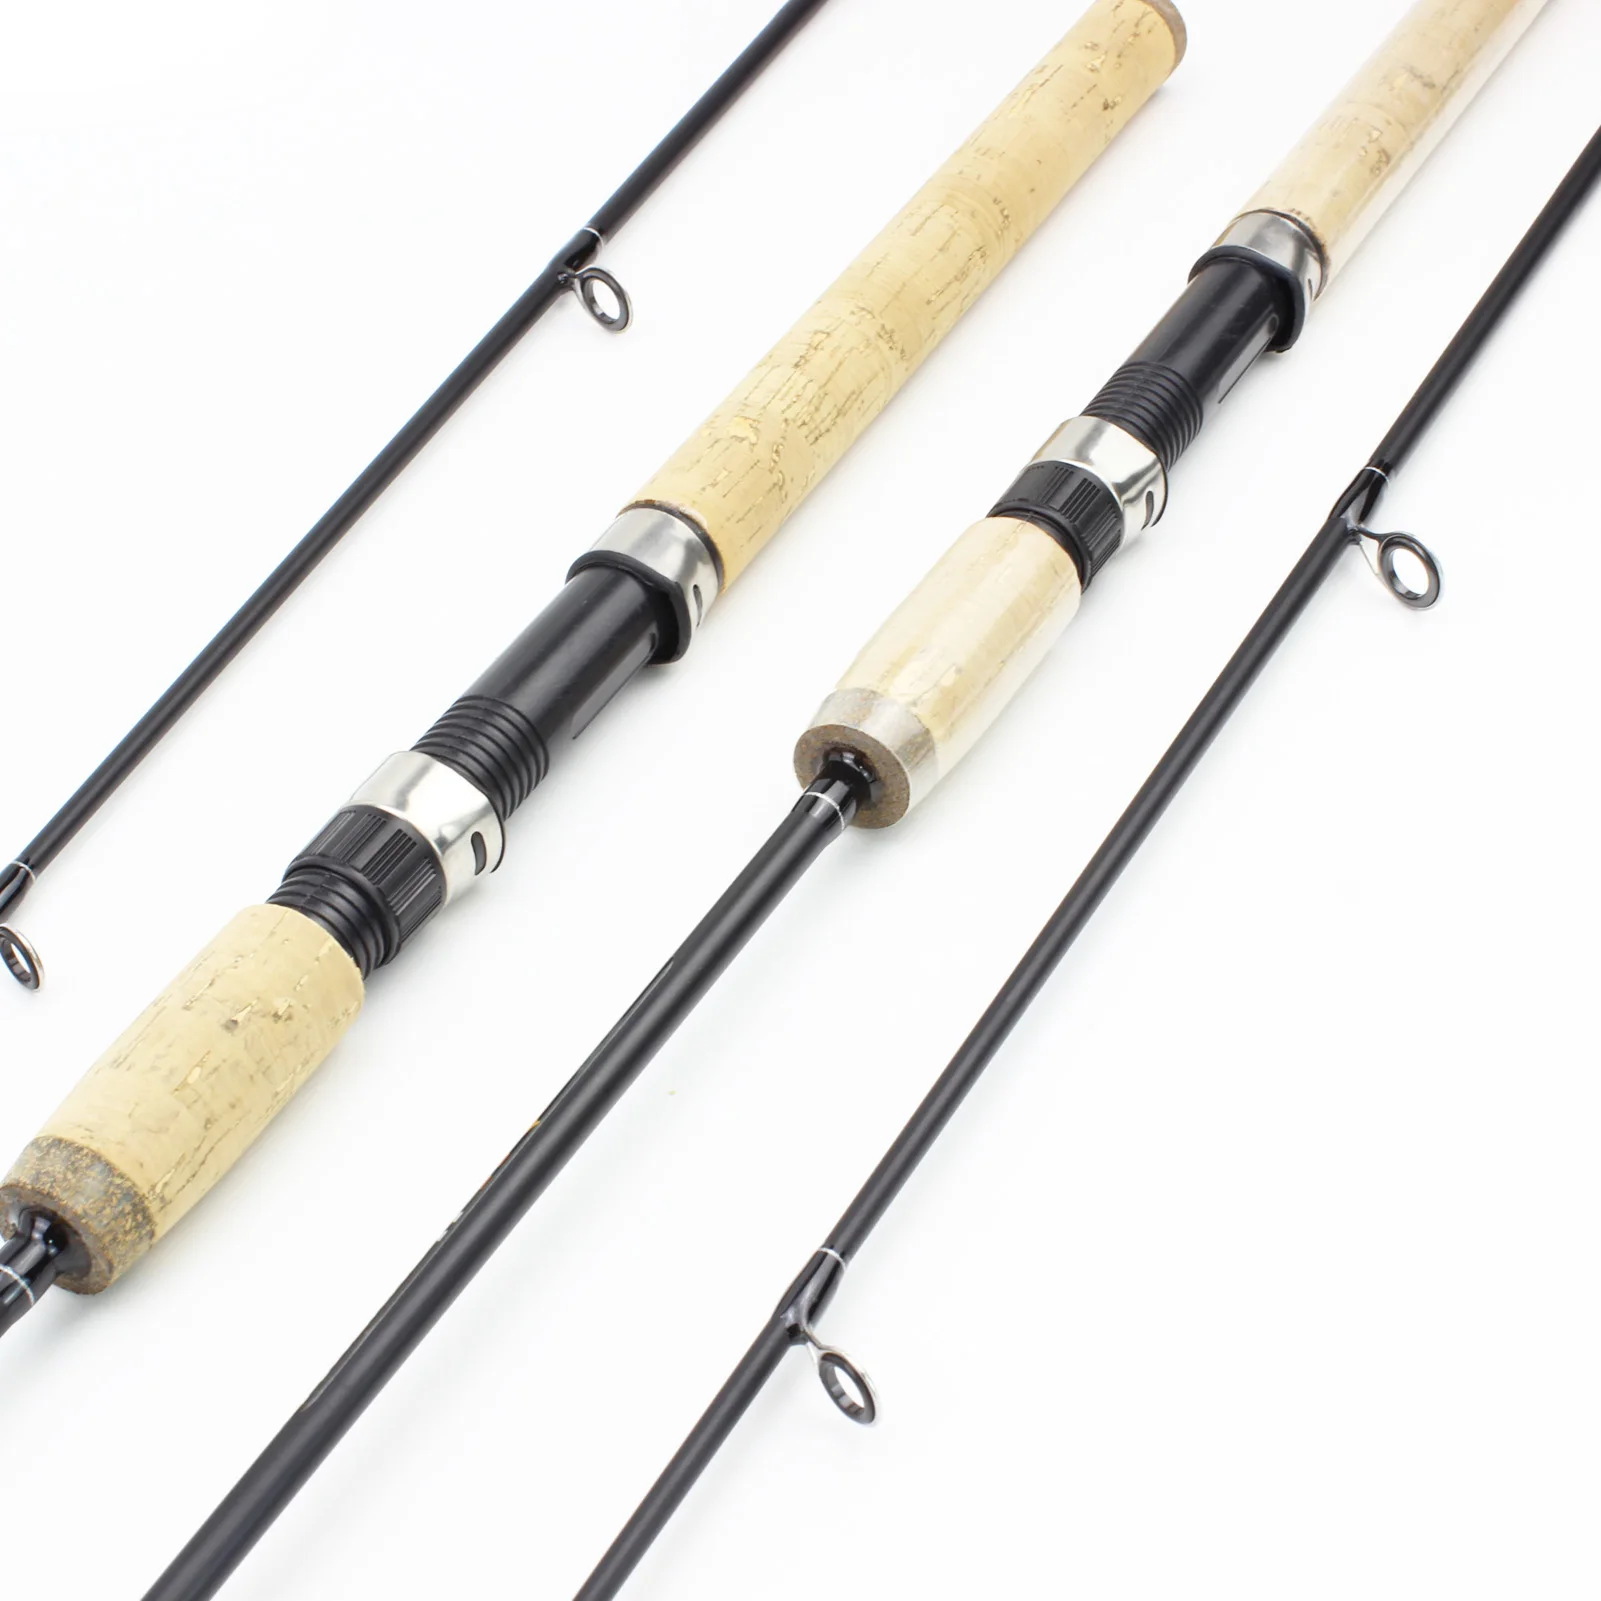 Long Wooden Handle Lure Fishing Rod, Carbon Fiber Trout Bait Rod, Bait  Weight 7-28g Rotating Rod M Power Fast Rod Pesca1.8m